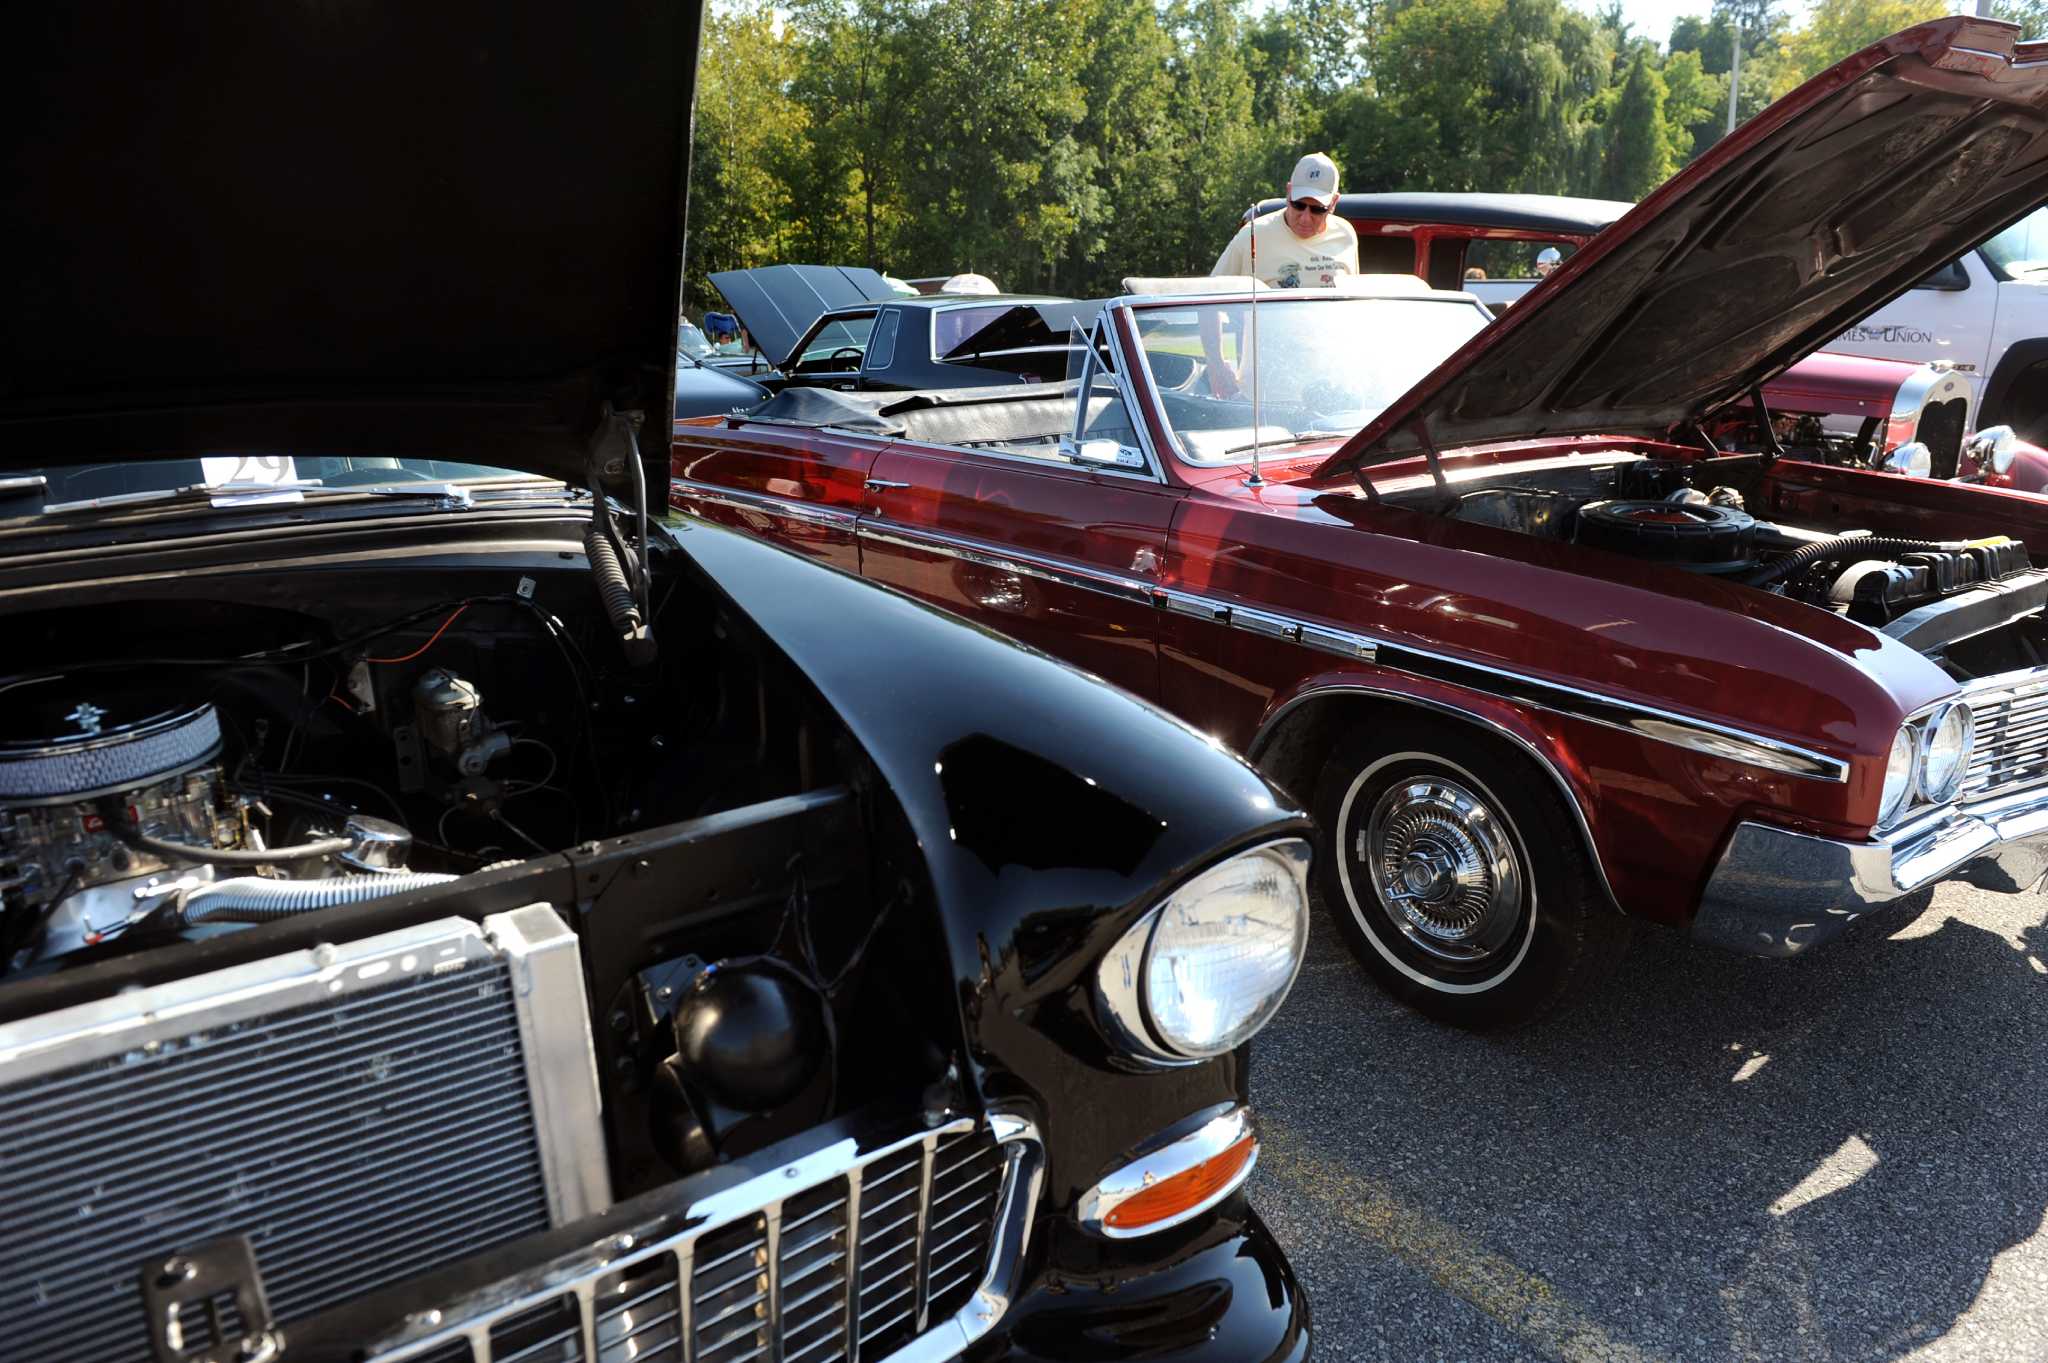 Times Union car show postponed to Sept. 25